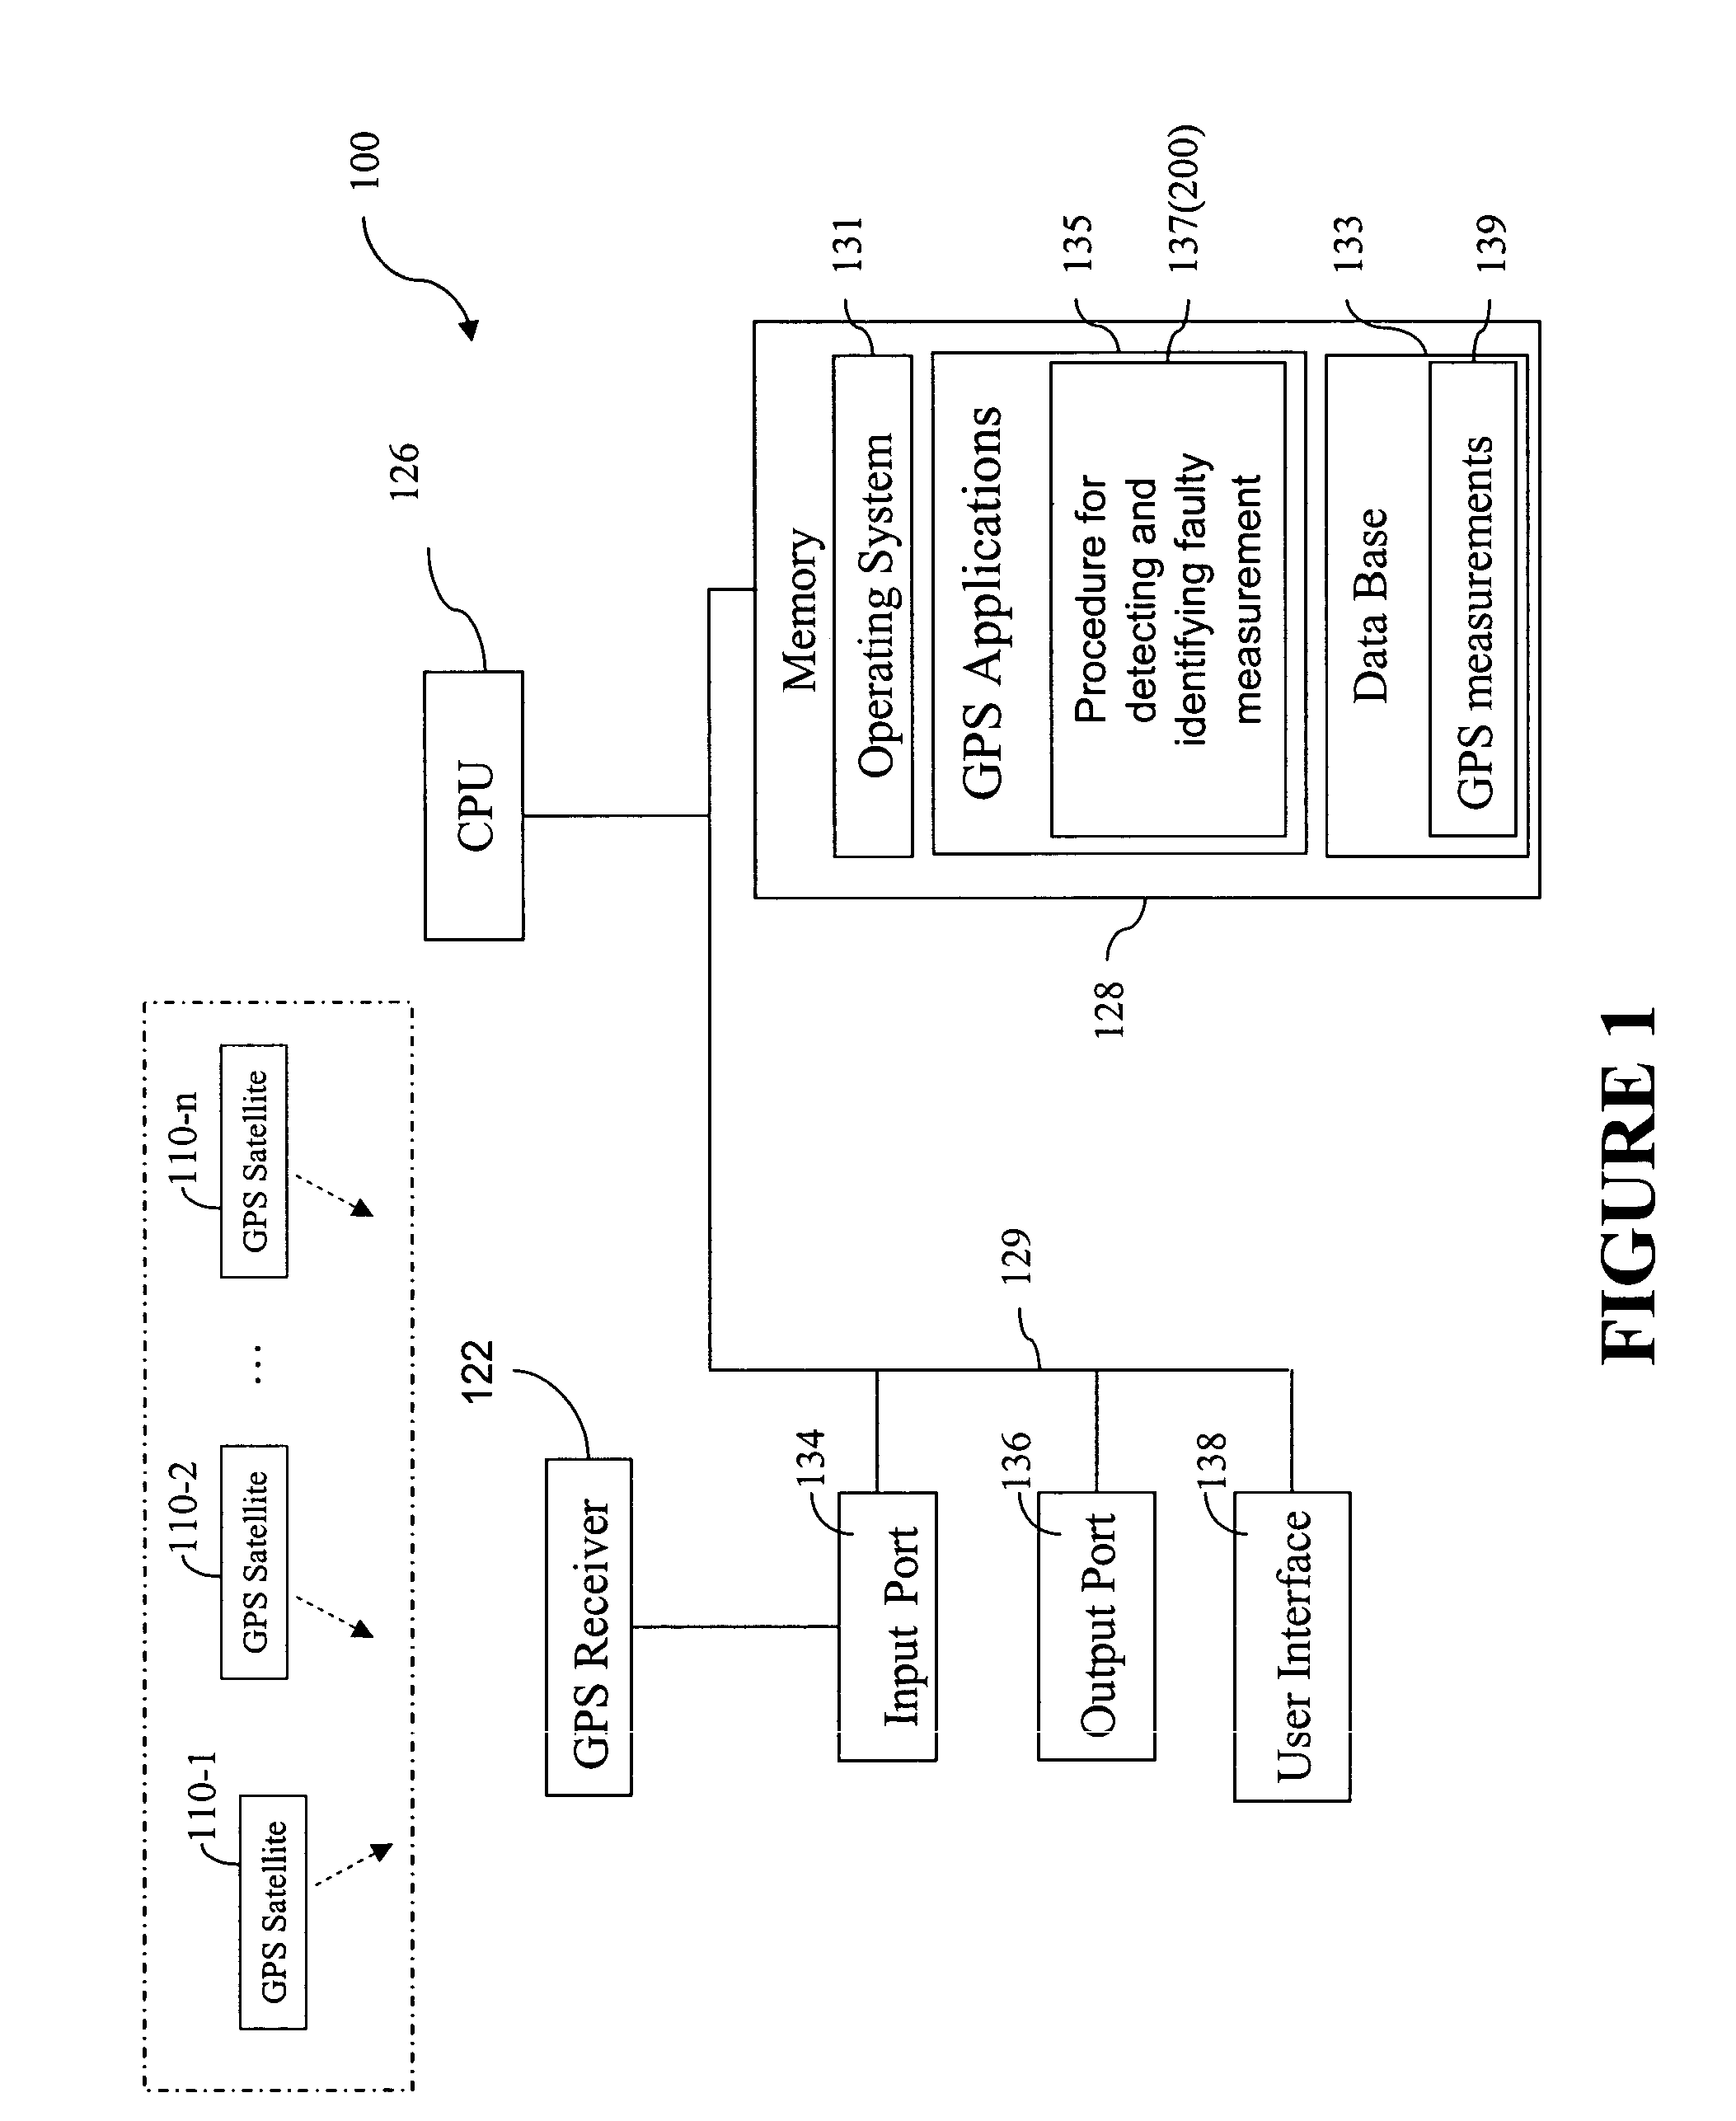 Method for receiver autonomous integrity monitoring and fault detection and elimination